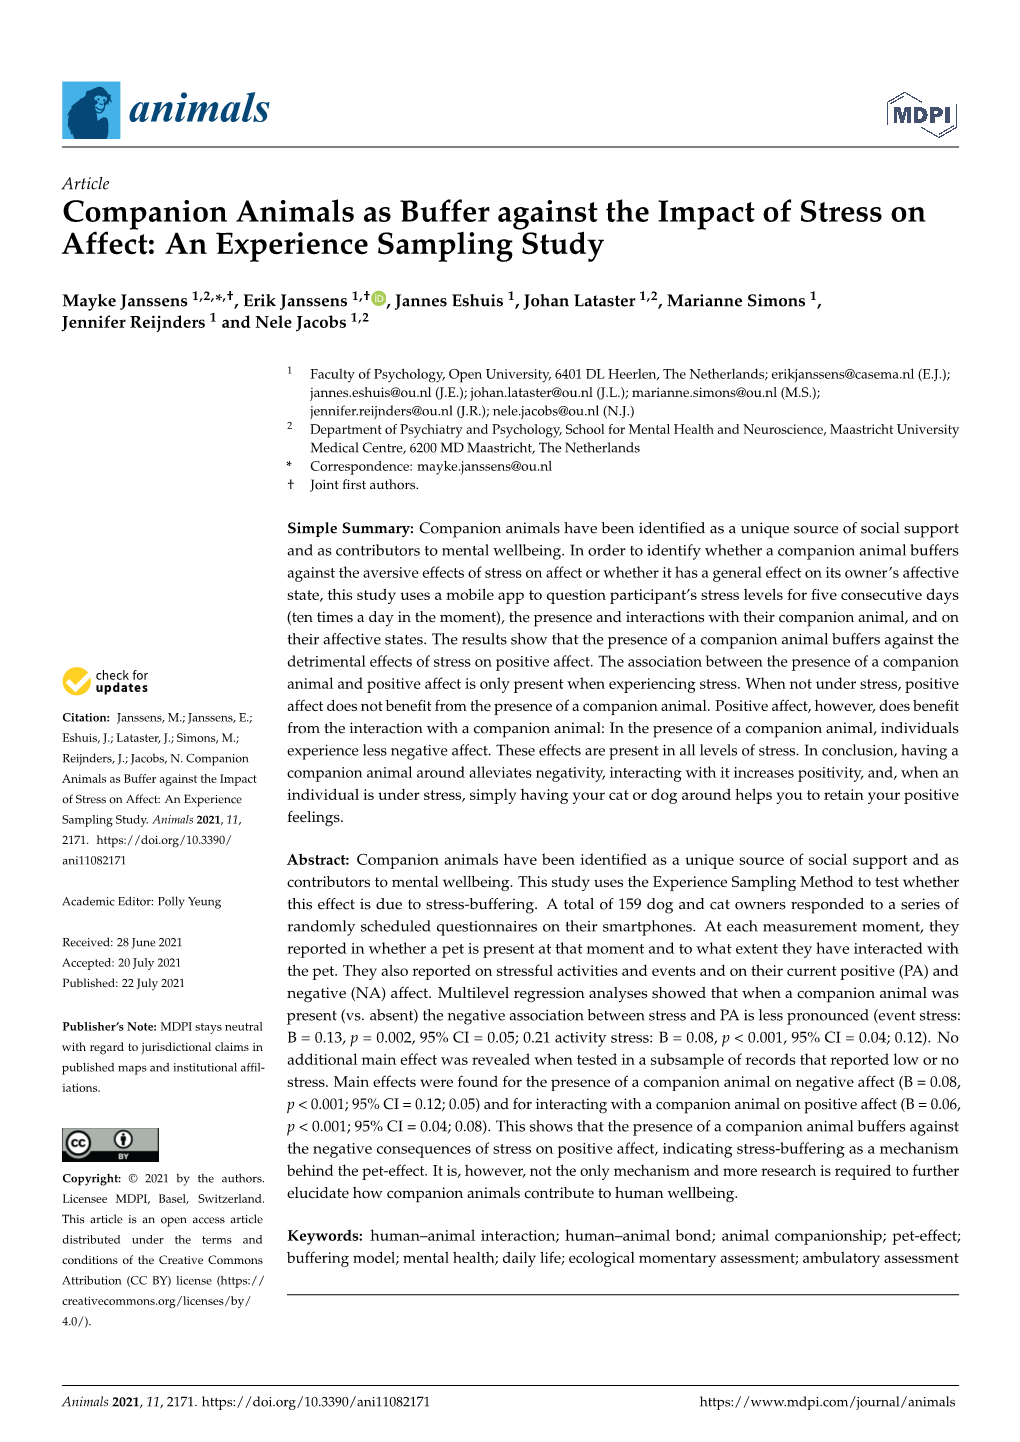 Companion Animals As Buffer Against the Impact of Stress on Affect: an Experience Sampling Study